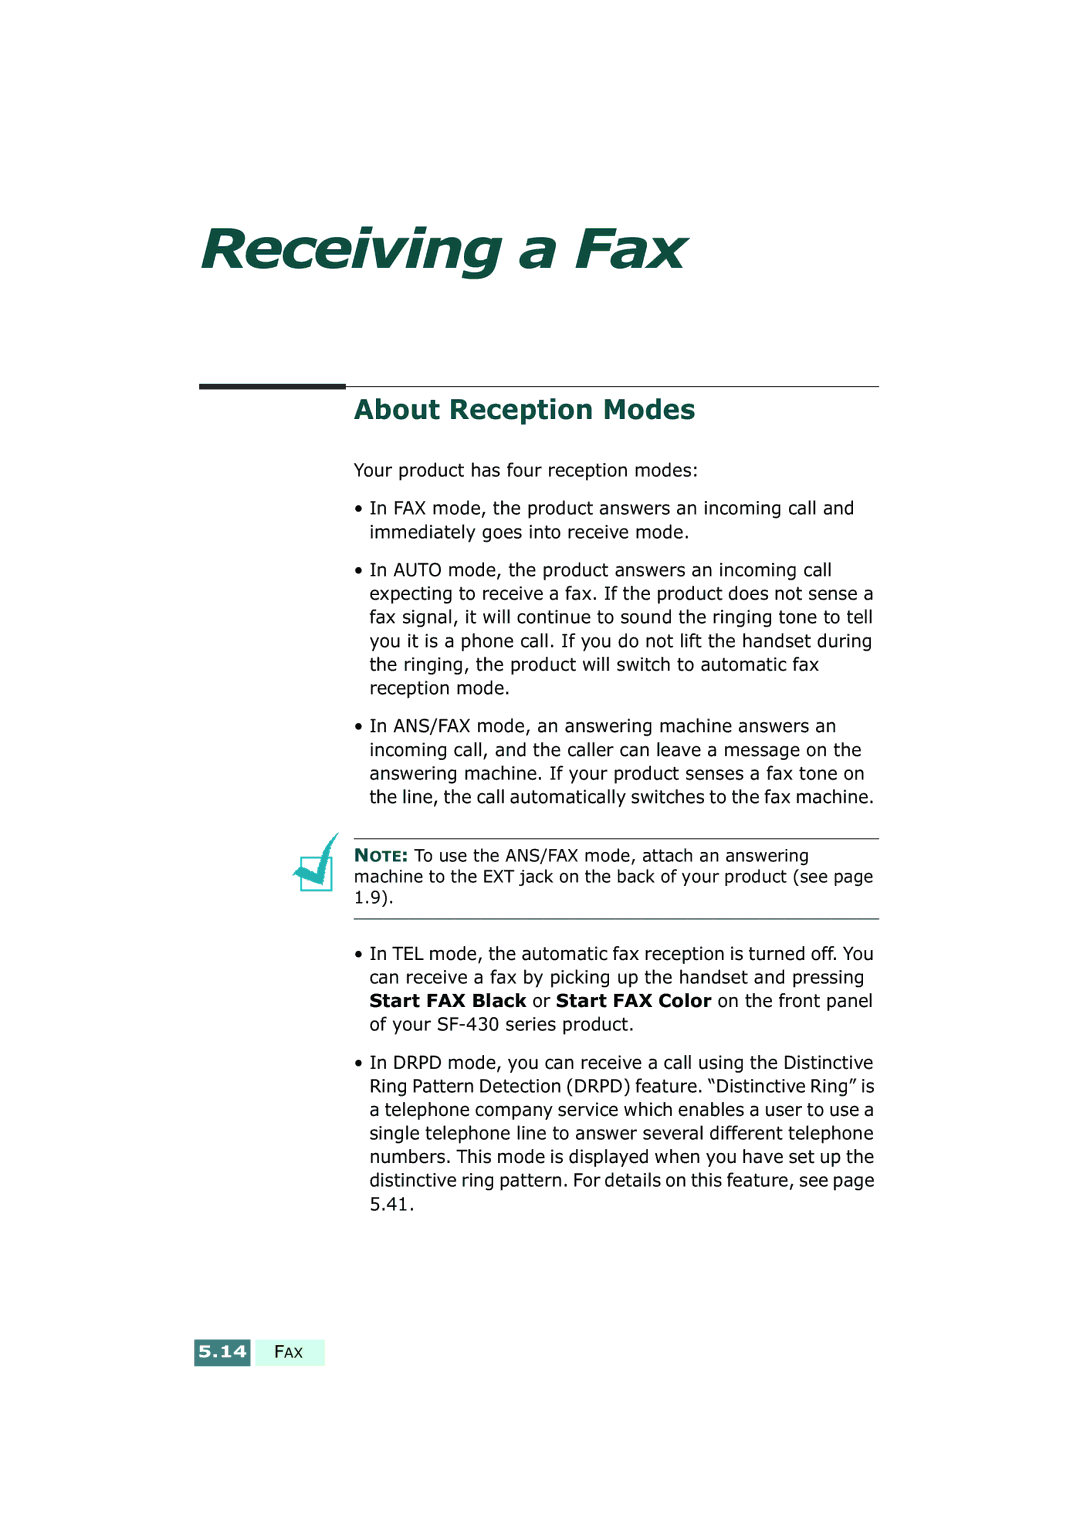 Samsung SF-430 manual Receiving a Fax, About Reception Modes 